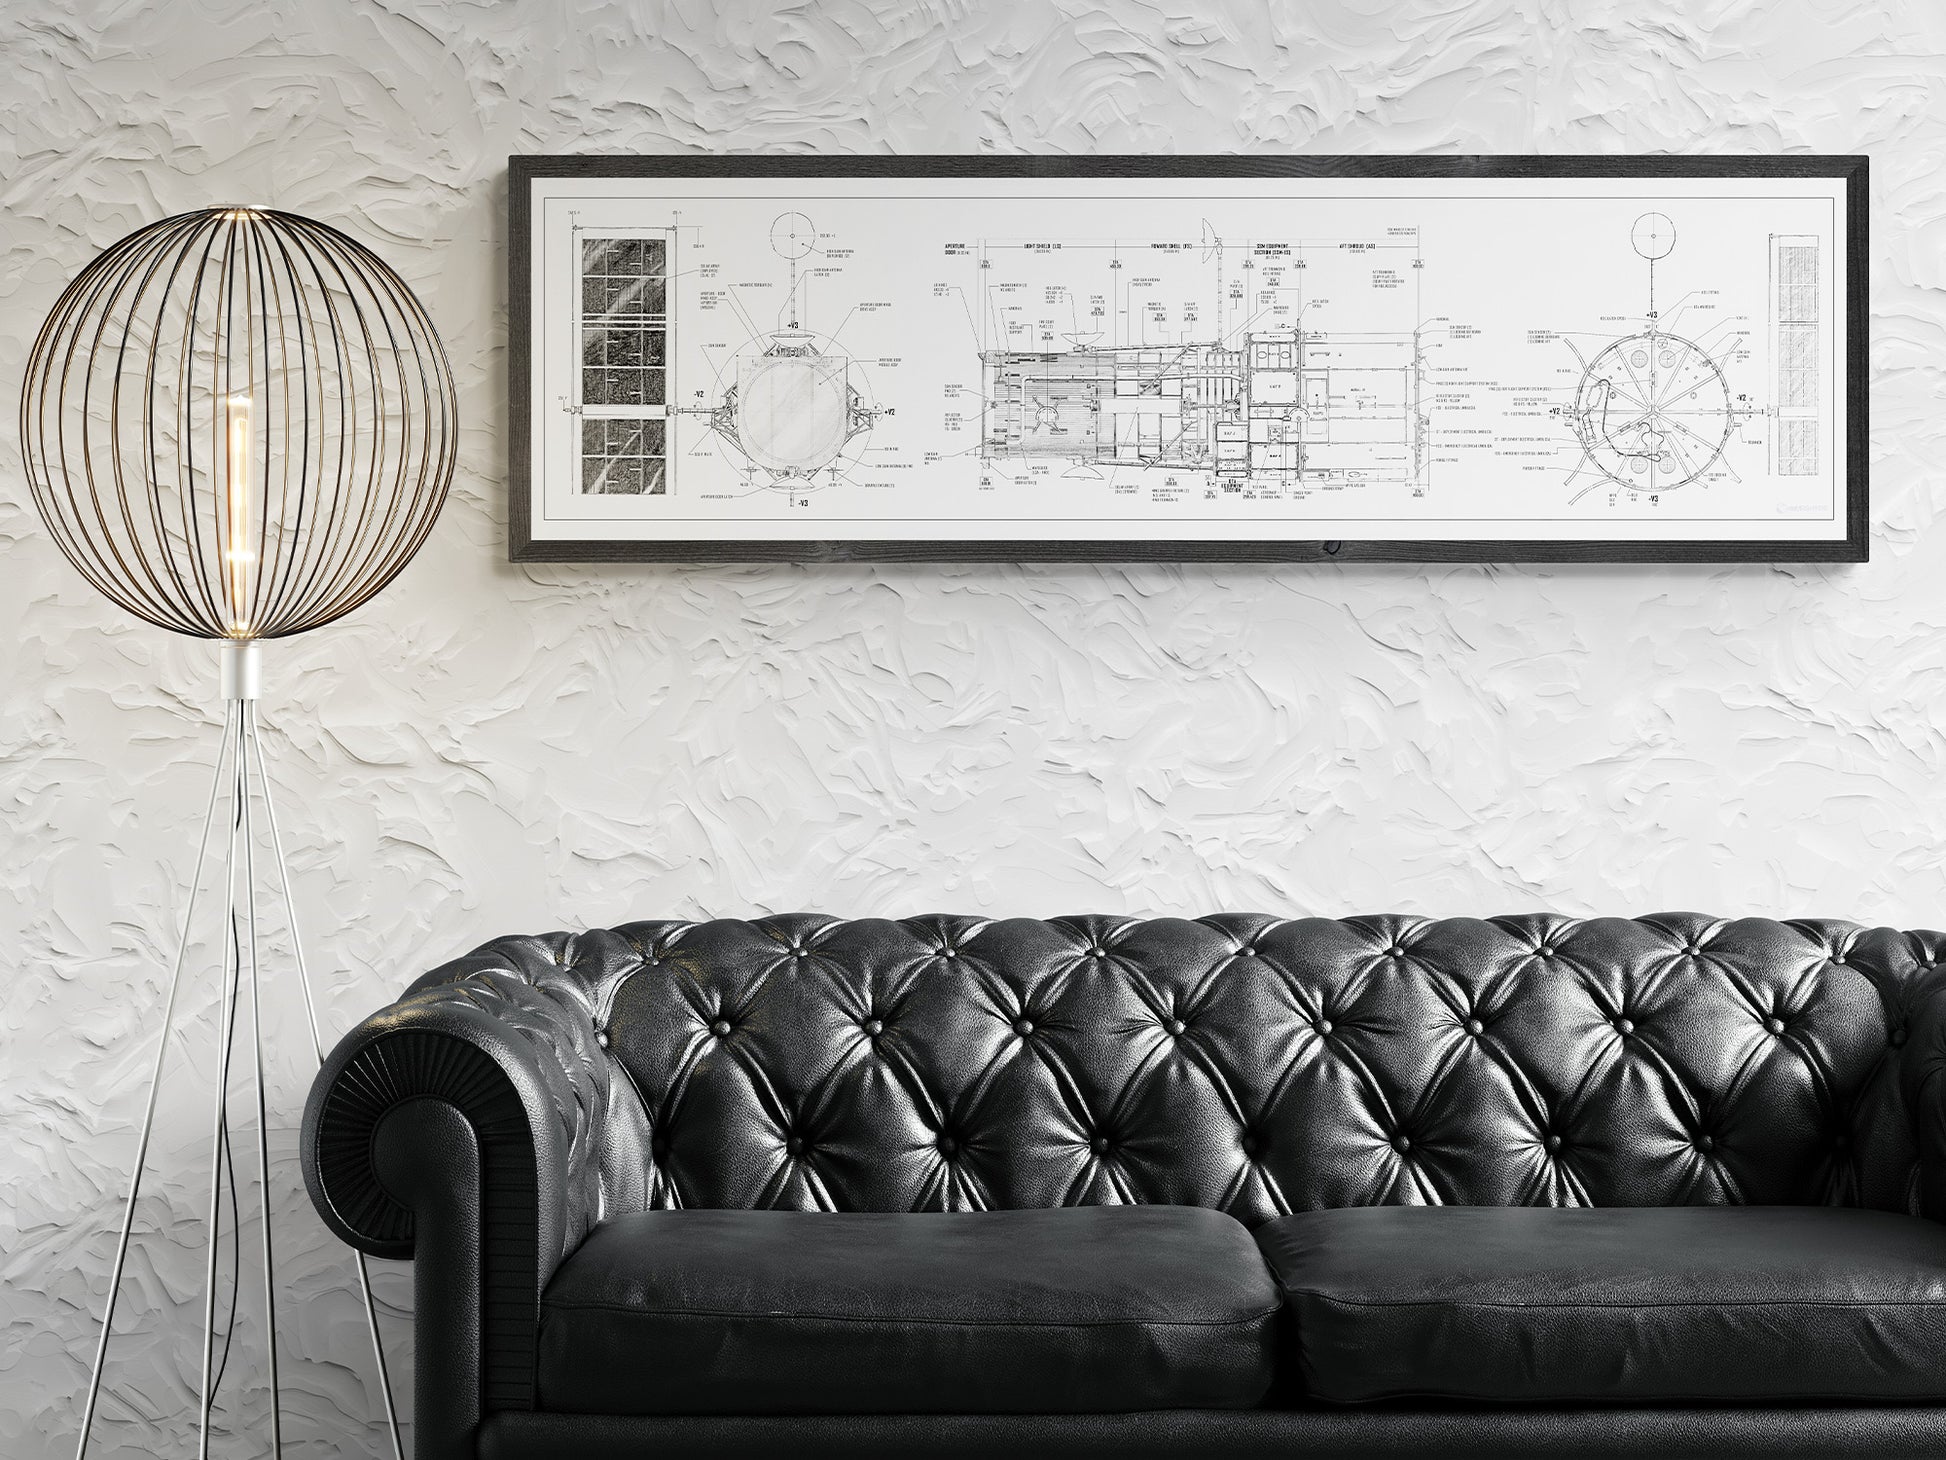 Hubble Space Telescope Blueprint | Rocket Blueprint Posters | A white-framed blueprint of the NASA Hubble Space Telescope hangs on a textured white wall above a black leather tufted sofa. A modern floor lamp with a spherical wireframe design stands to the left of the sofa, adding a stylish touch to the contemporary living space.